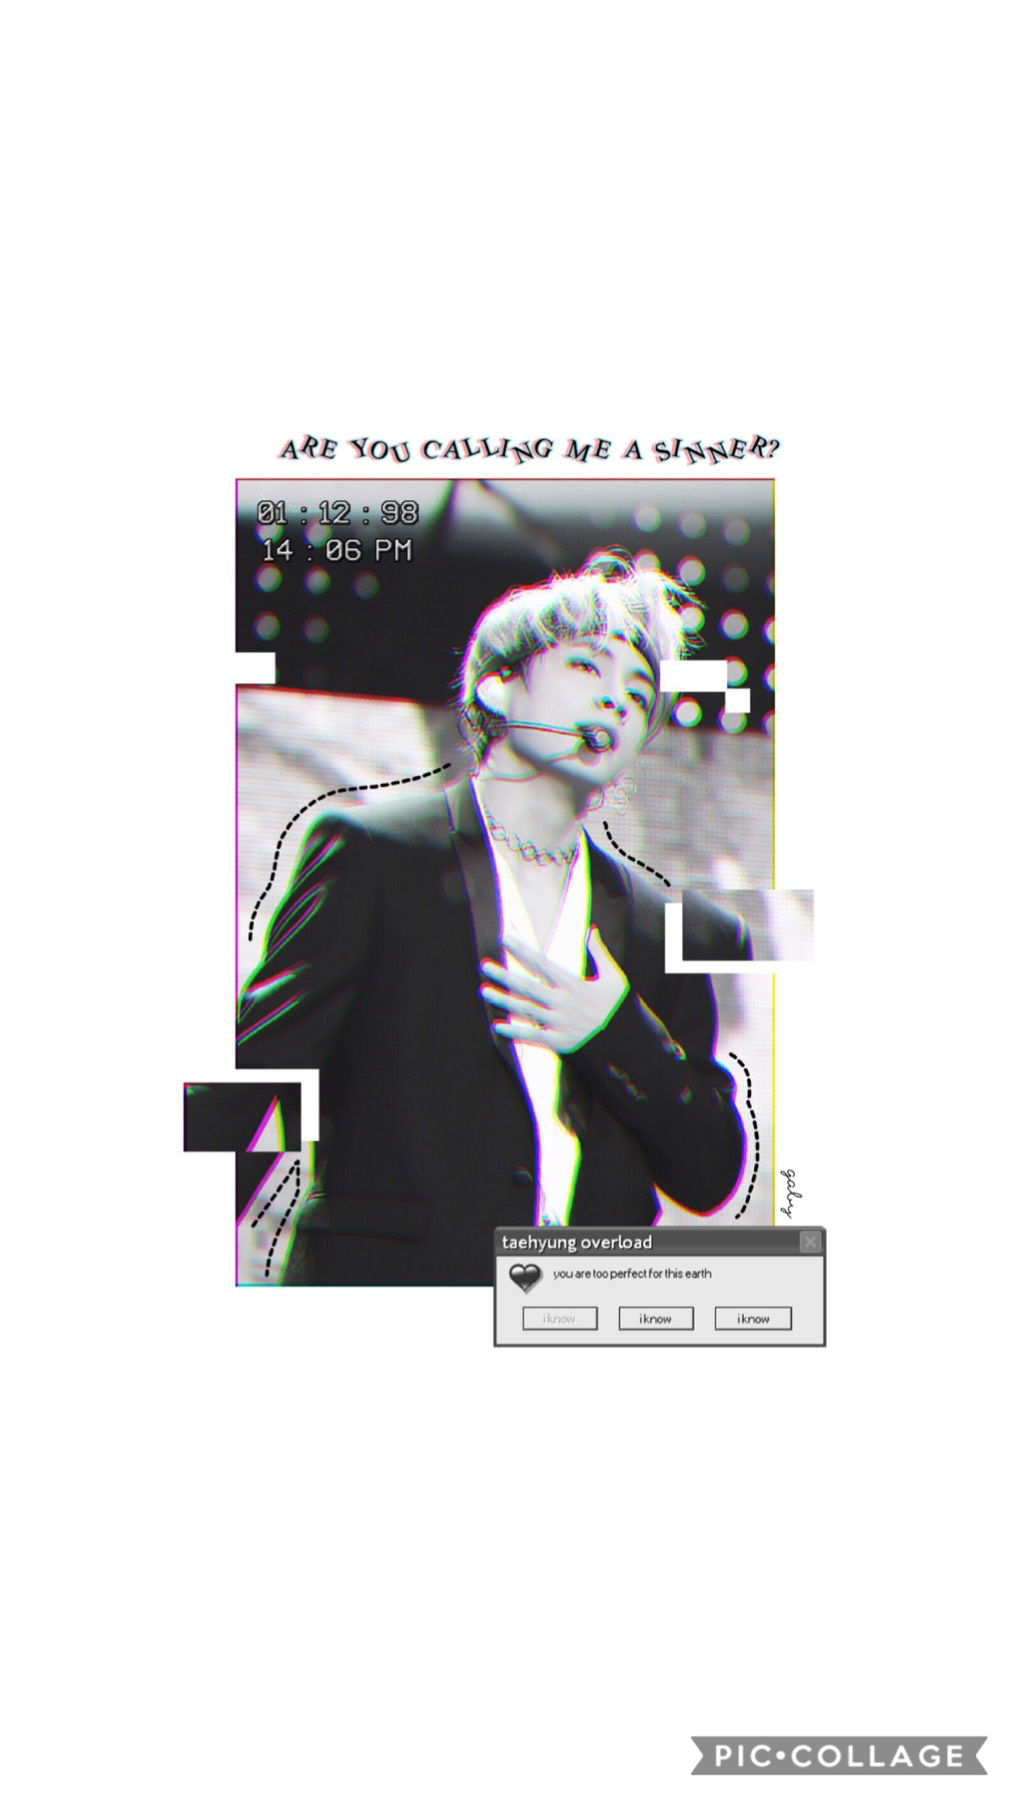 tap ♠️
lil simple(ish) edit
slightly inspired by _oxyjin_ and vxlvxt
i’ve been losing inspiration lol oops